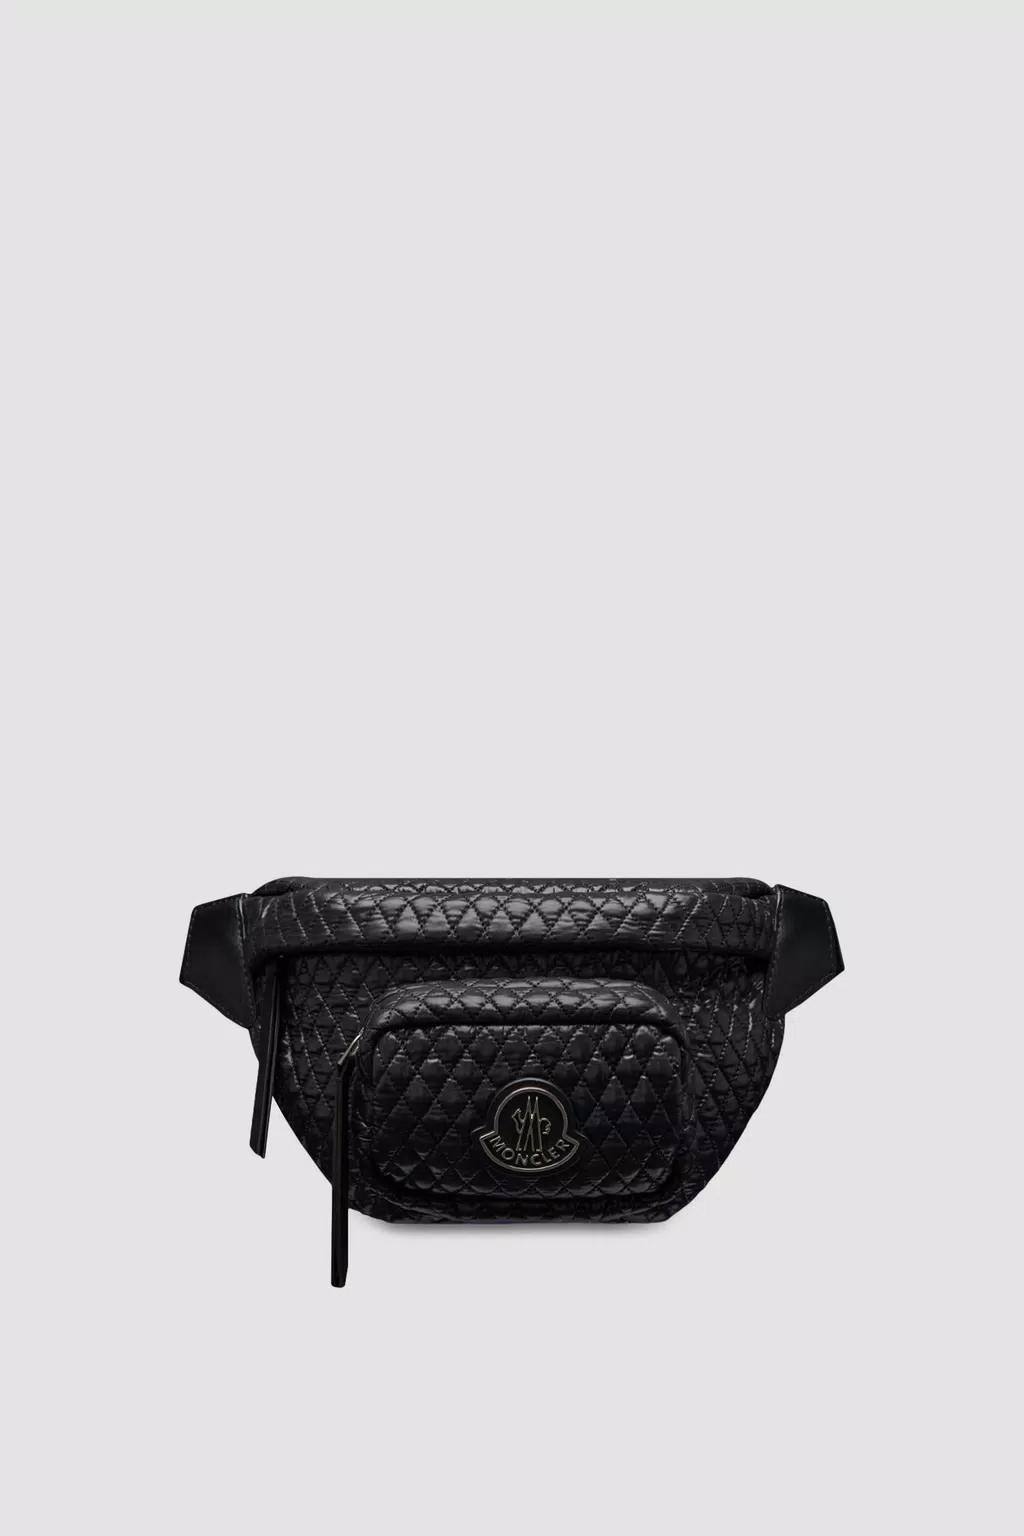 Moncler Felicie Fanny Pack in Red